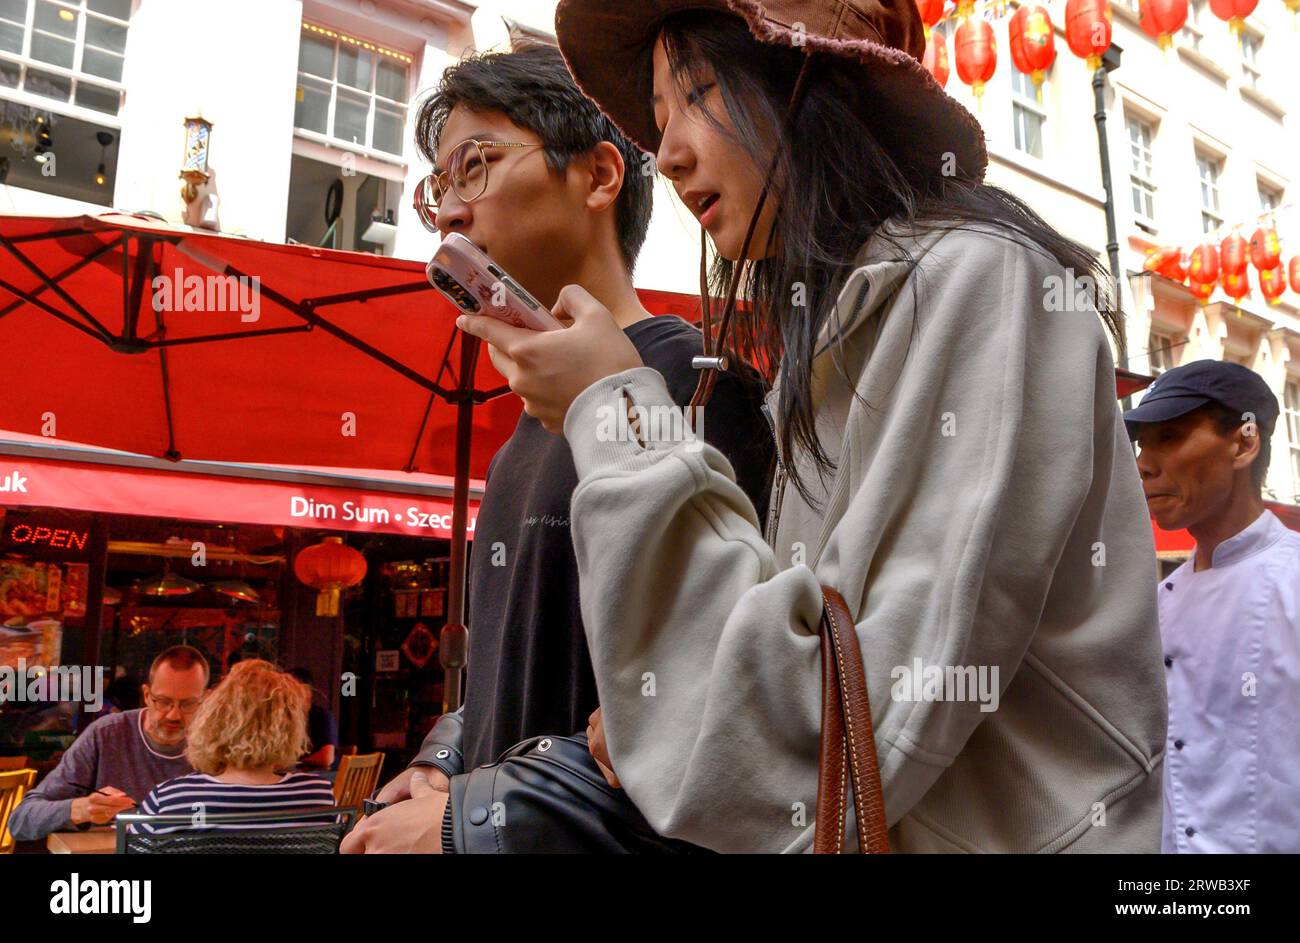 London, England, UK. Young Chinese couple in Chinatown. Woman checking her phone Stock Photo